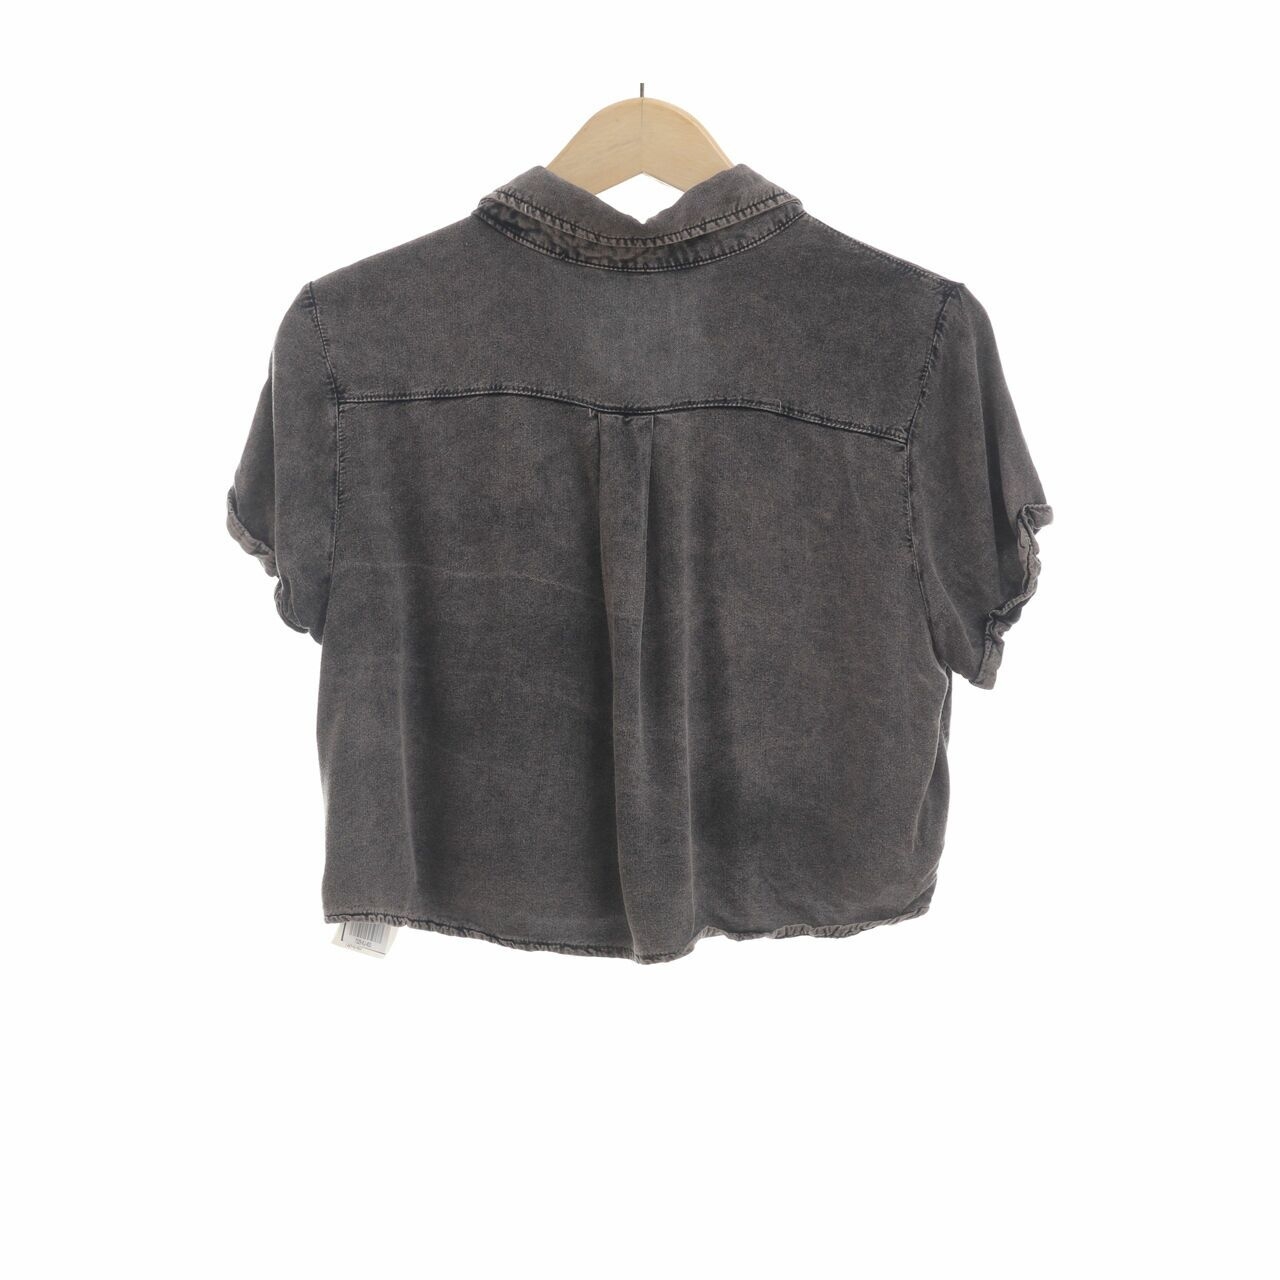 Brandy Melville Grey Washed Cropped Shirt